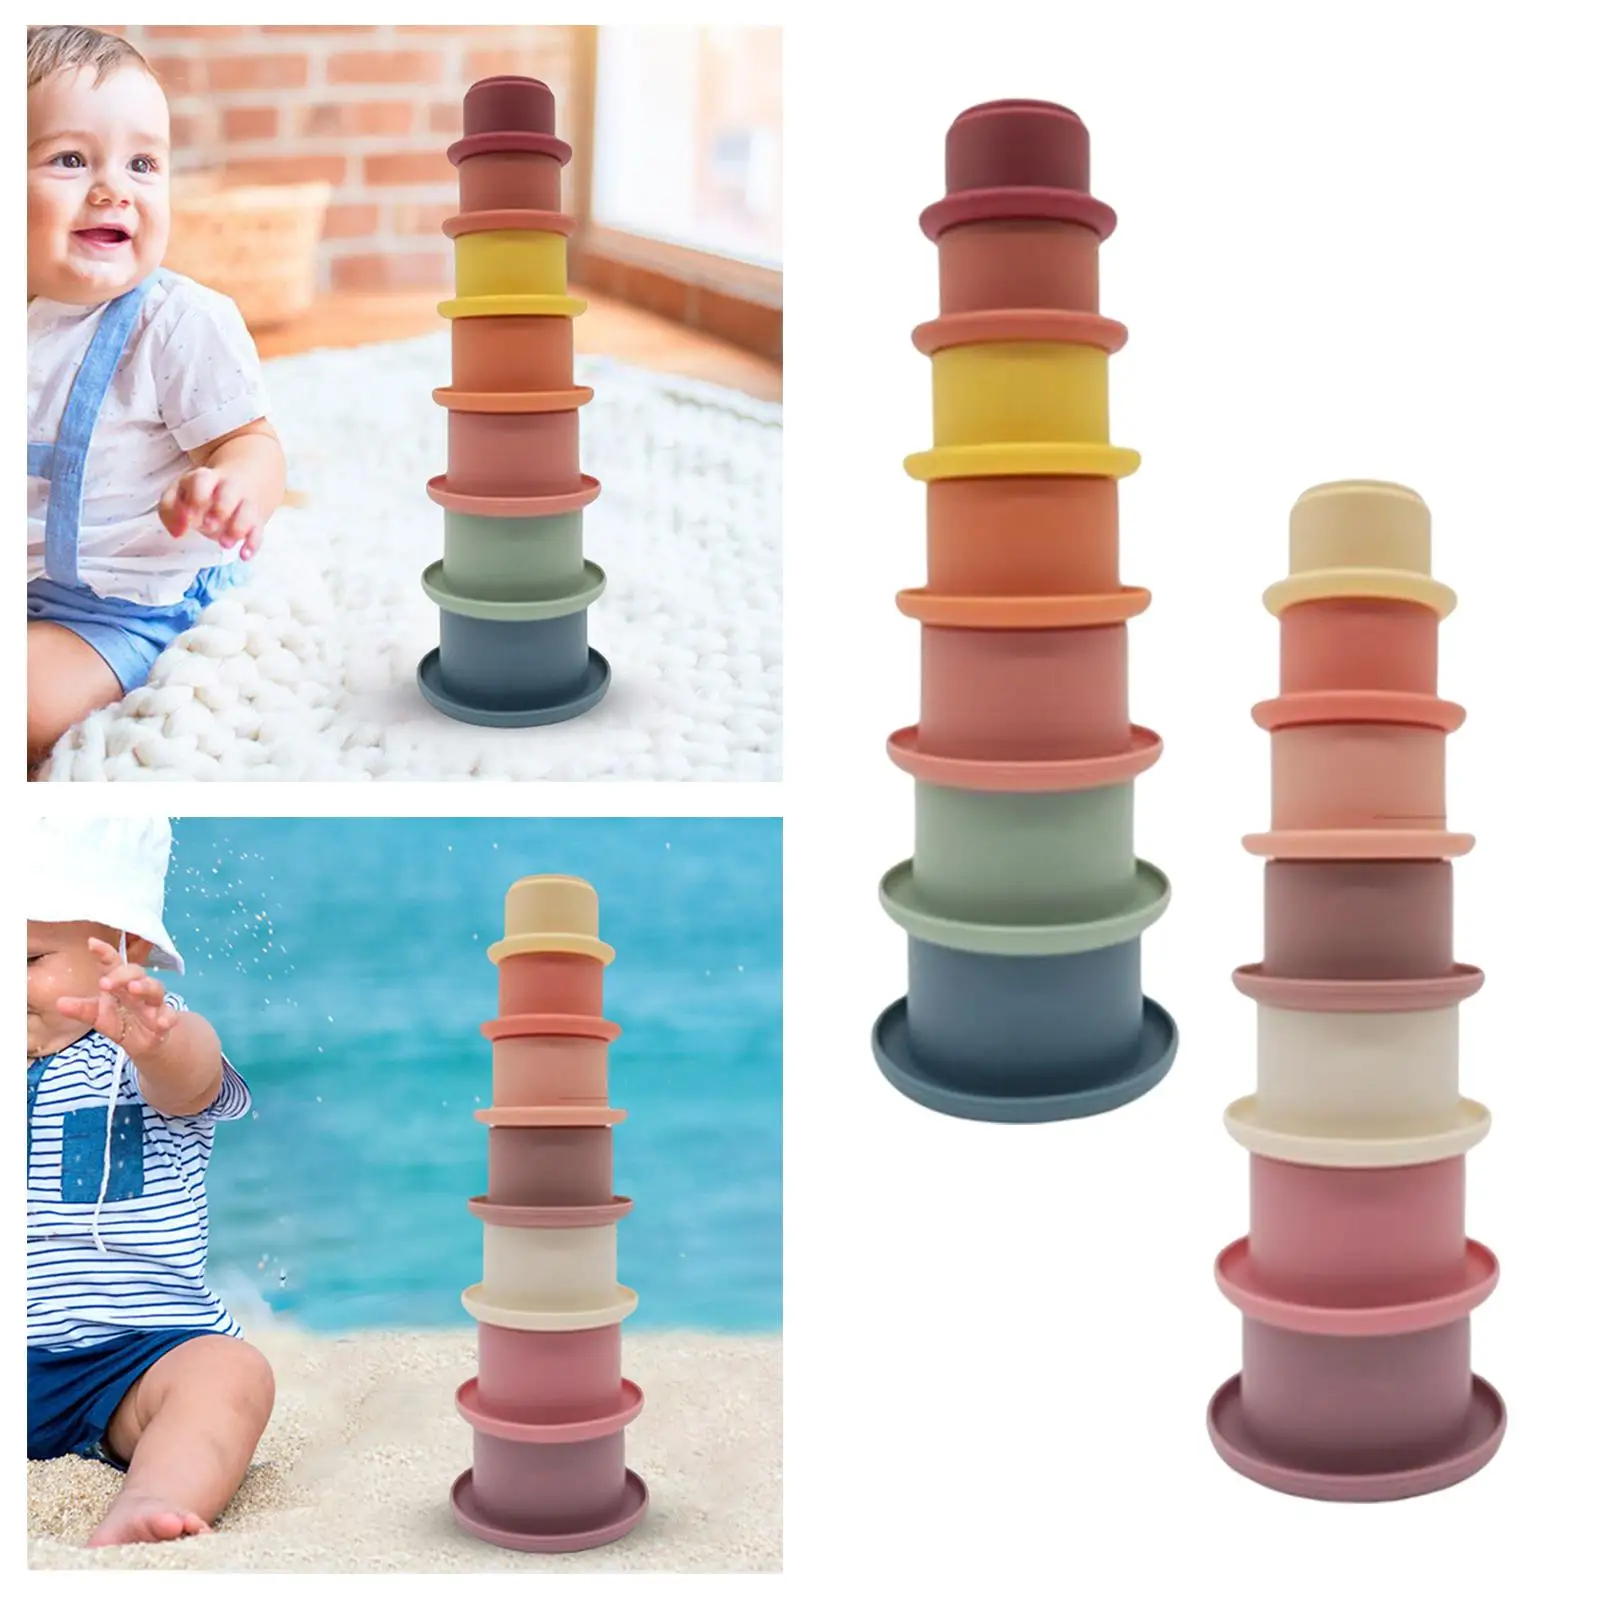 7Pcs Fun Stacking Cups Toy Bathtub Toys Montessori Nesting Cups for Toddler